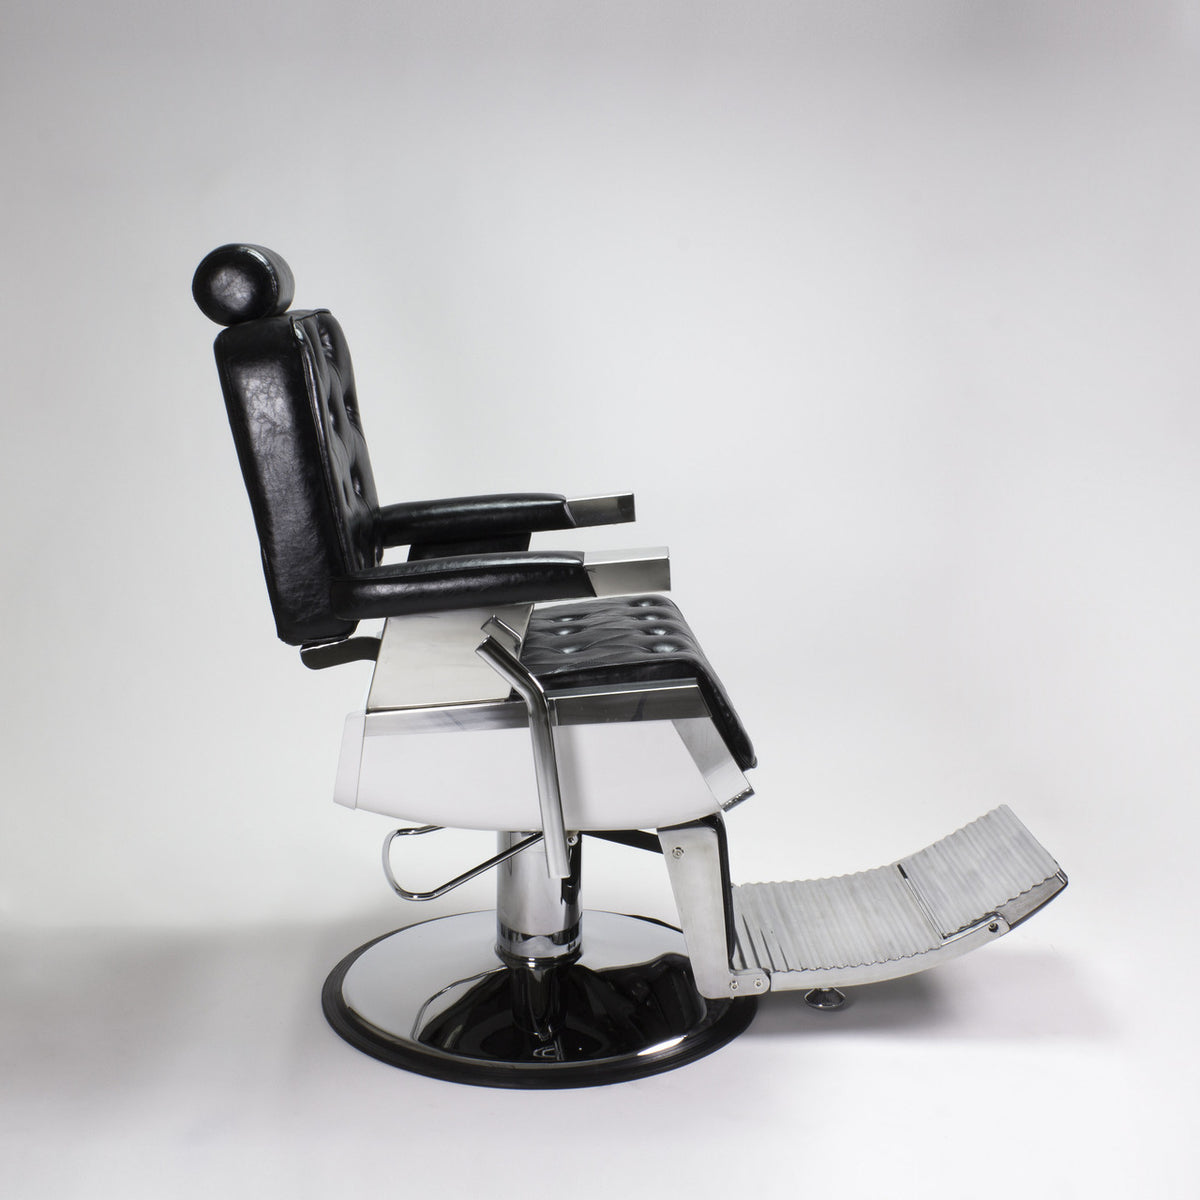 Berkeley Berkeley Rowling Barber Chair Barber Chairs - ChairsThatGive